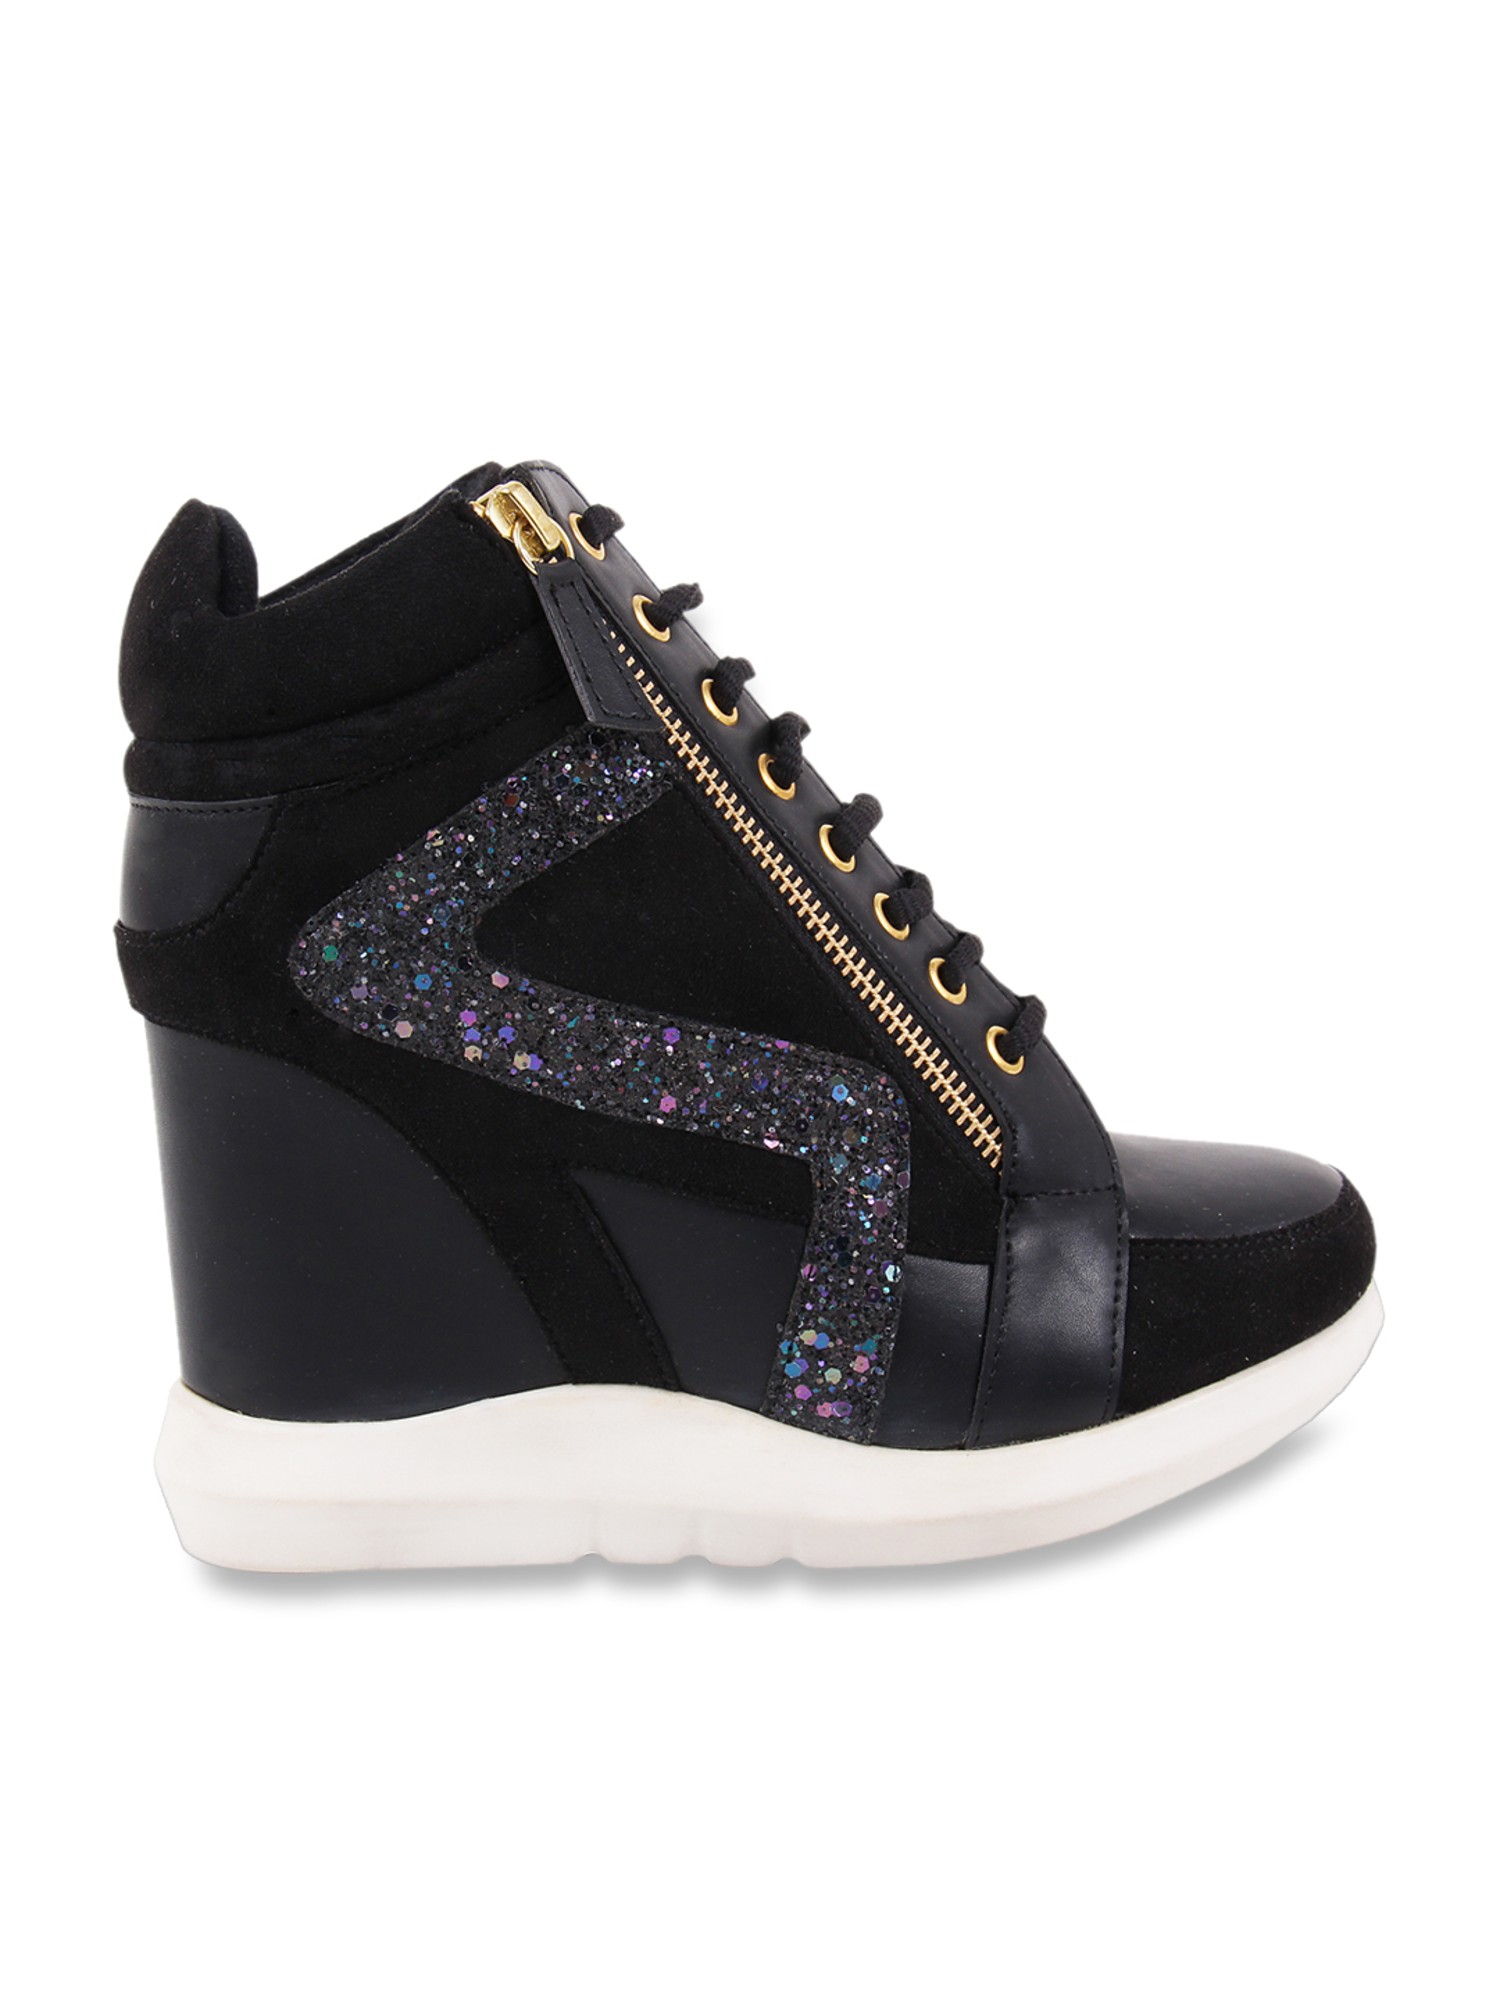 Black Snakeskin Print Textured Wedge Sneaker with Zippers | Lime Lush